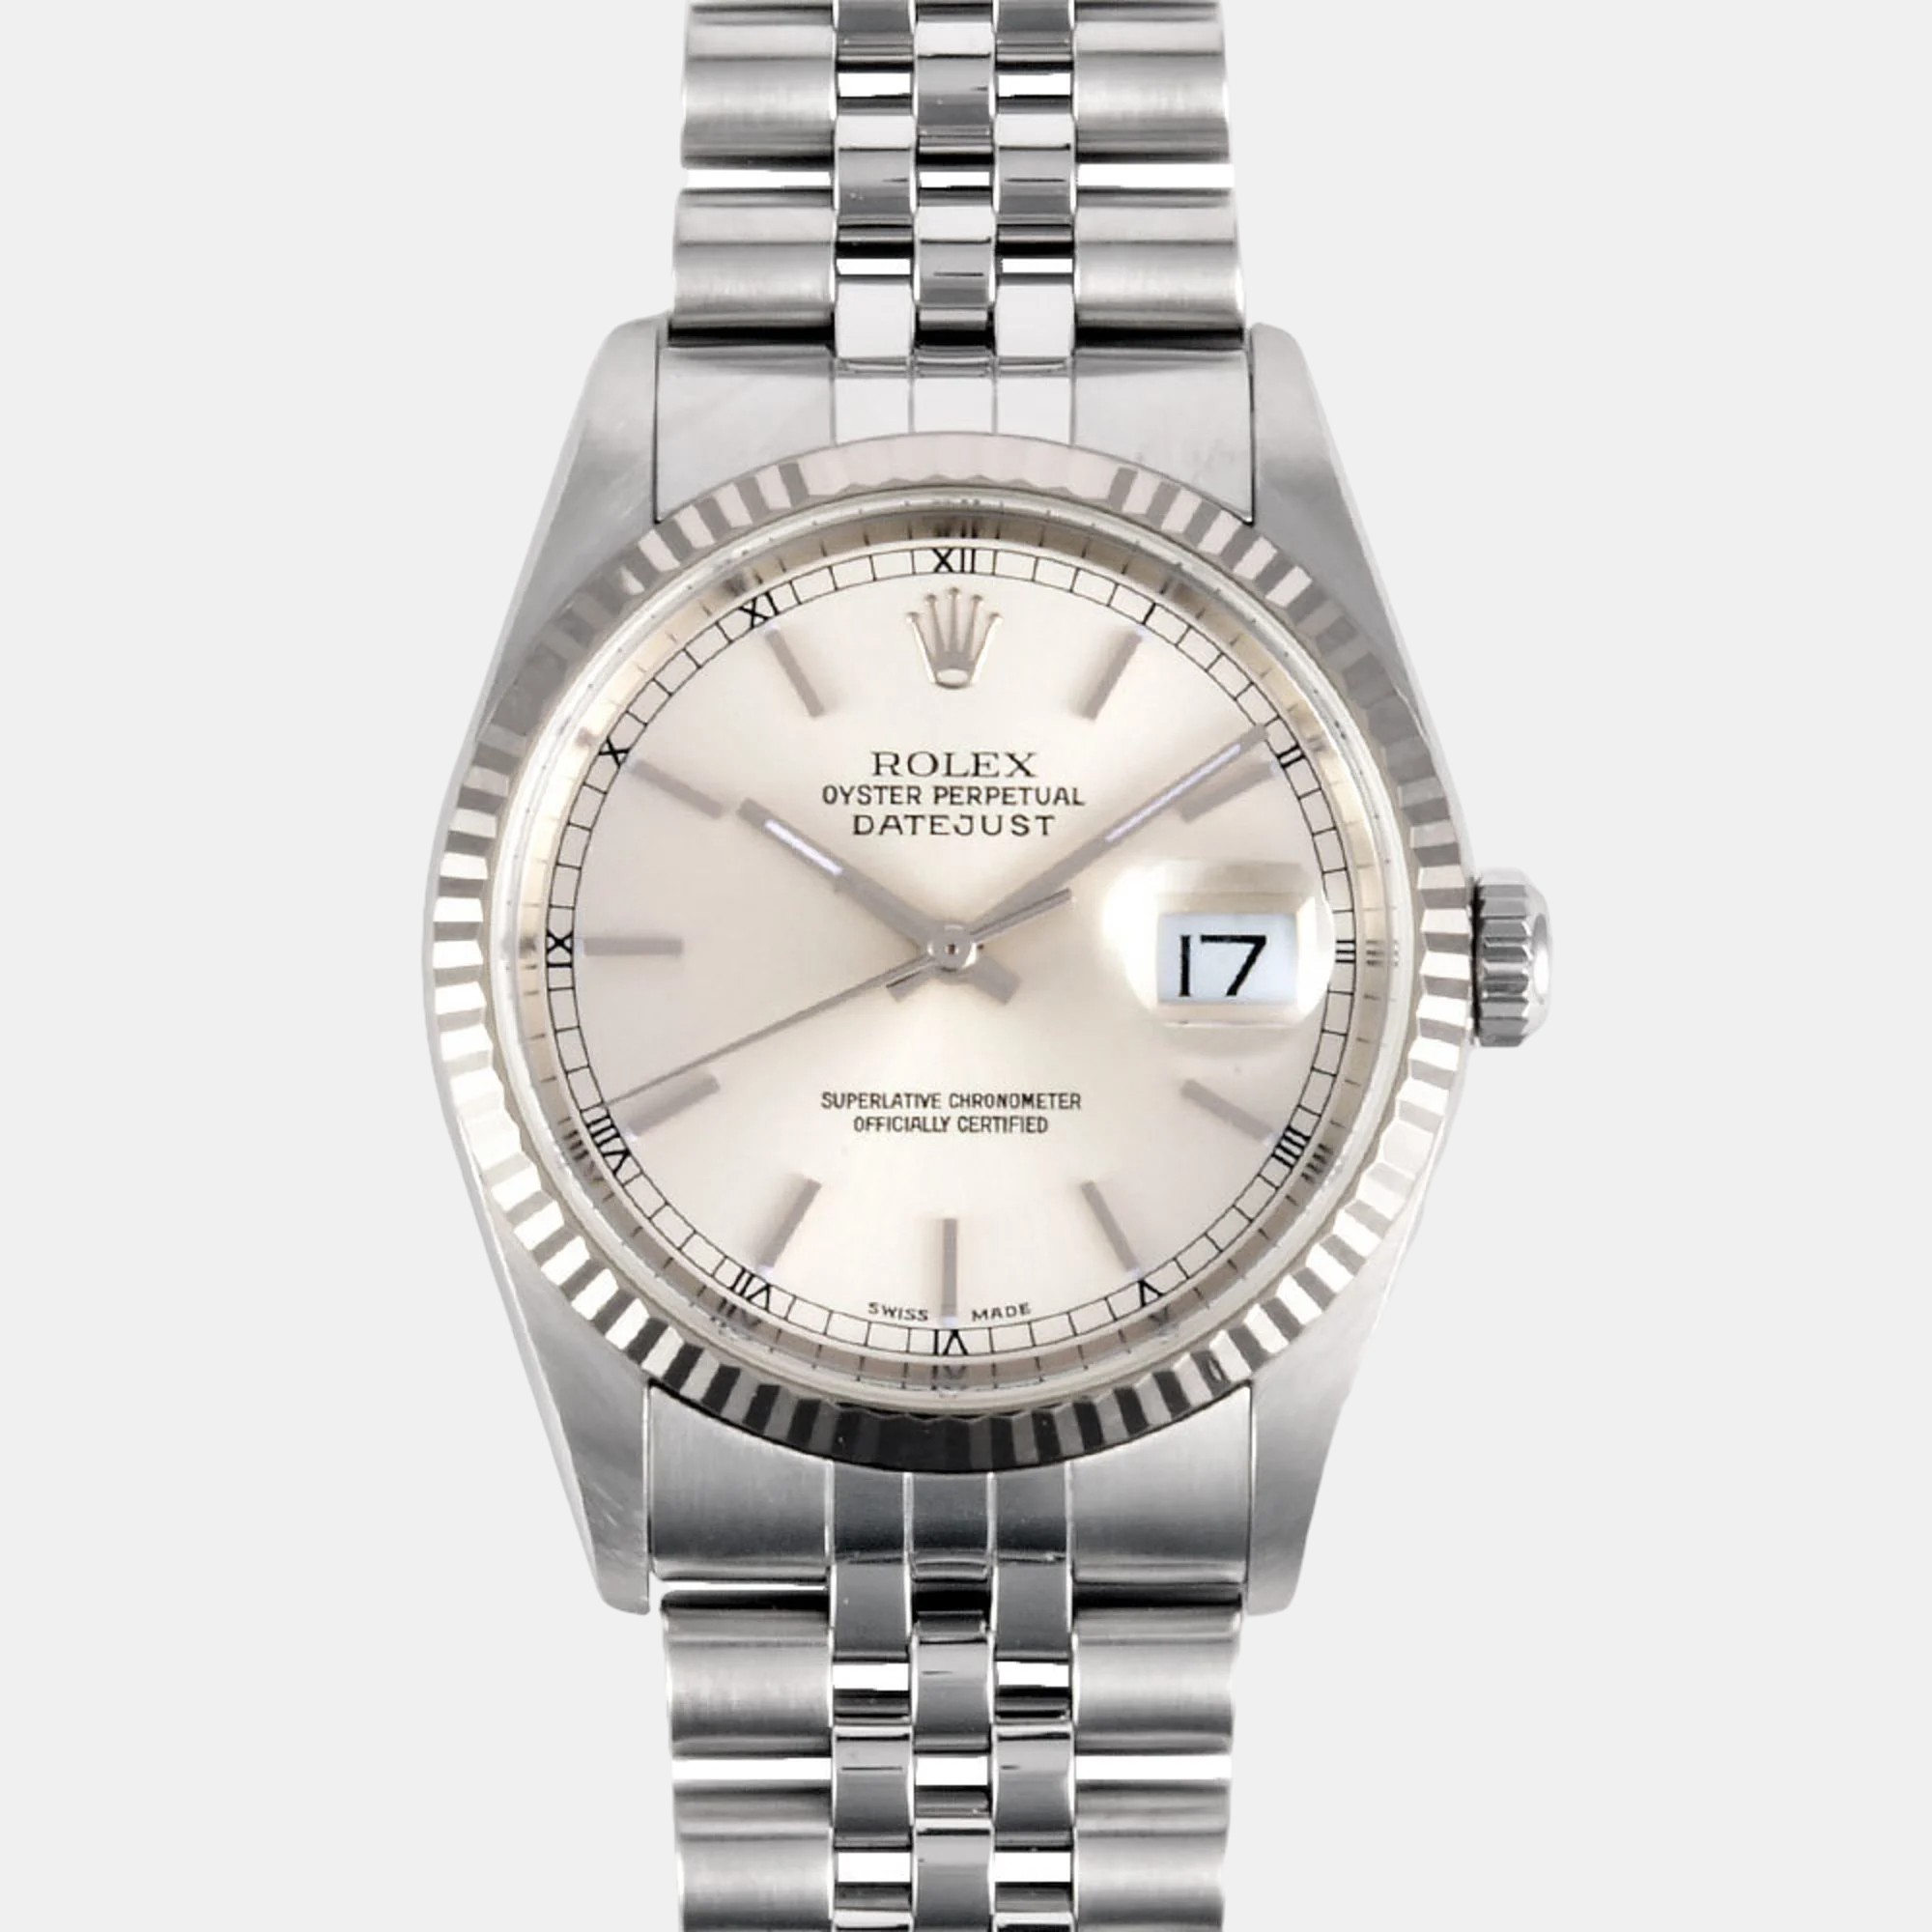 Rolex white stainless steel datejust 16234 automatic women's wristwatch 36 mm